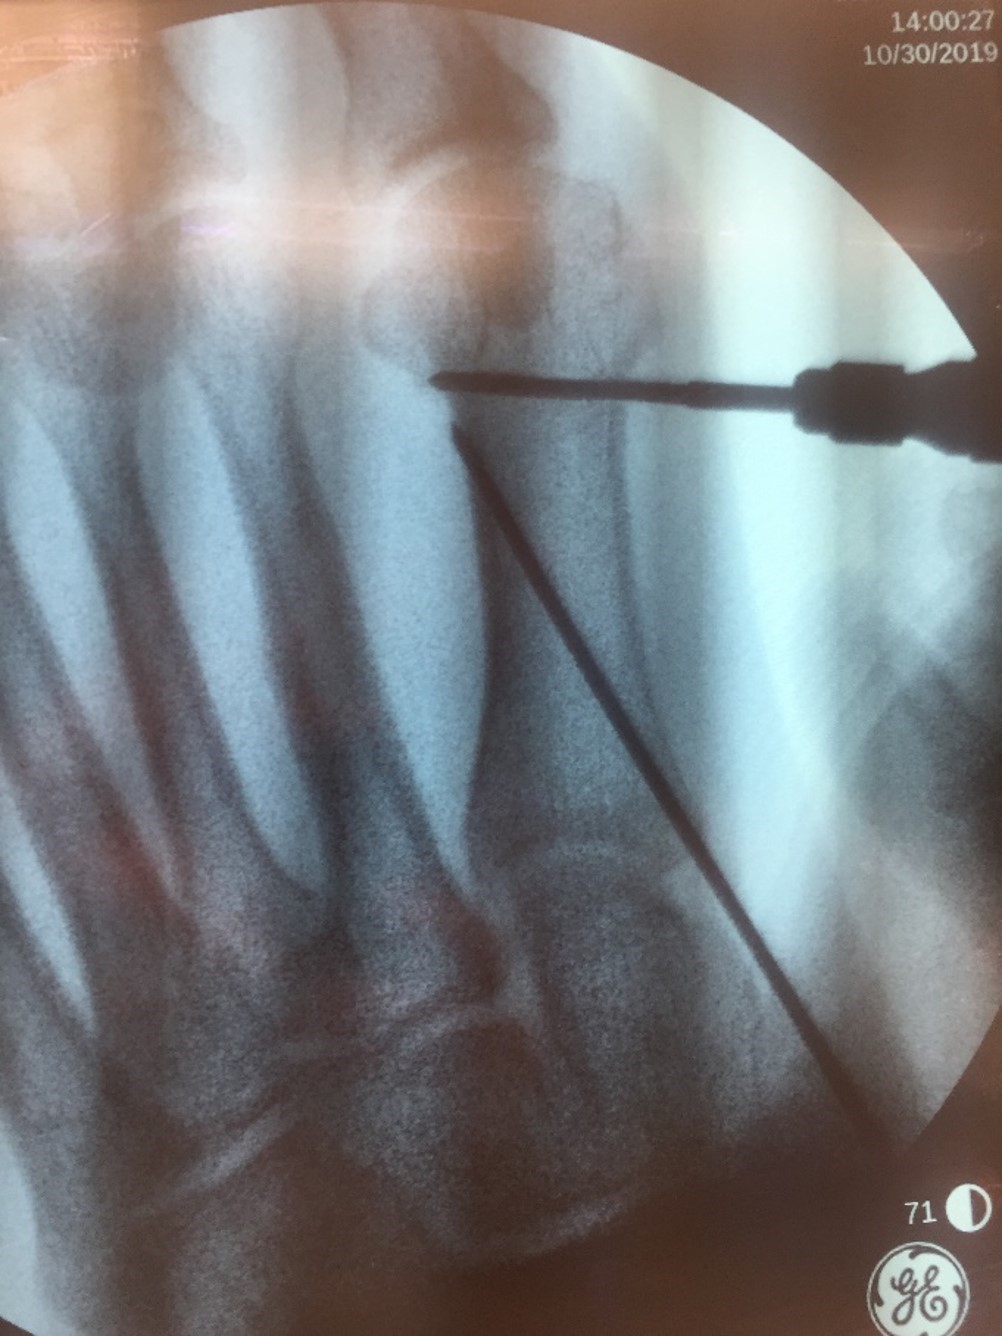 Burr in position to complete distal chevron osteotomy, with pre-positioned k-wire